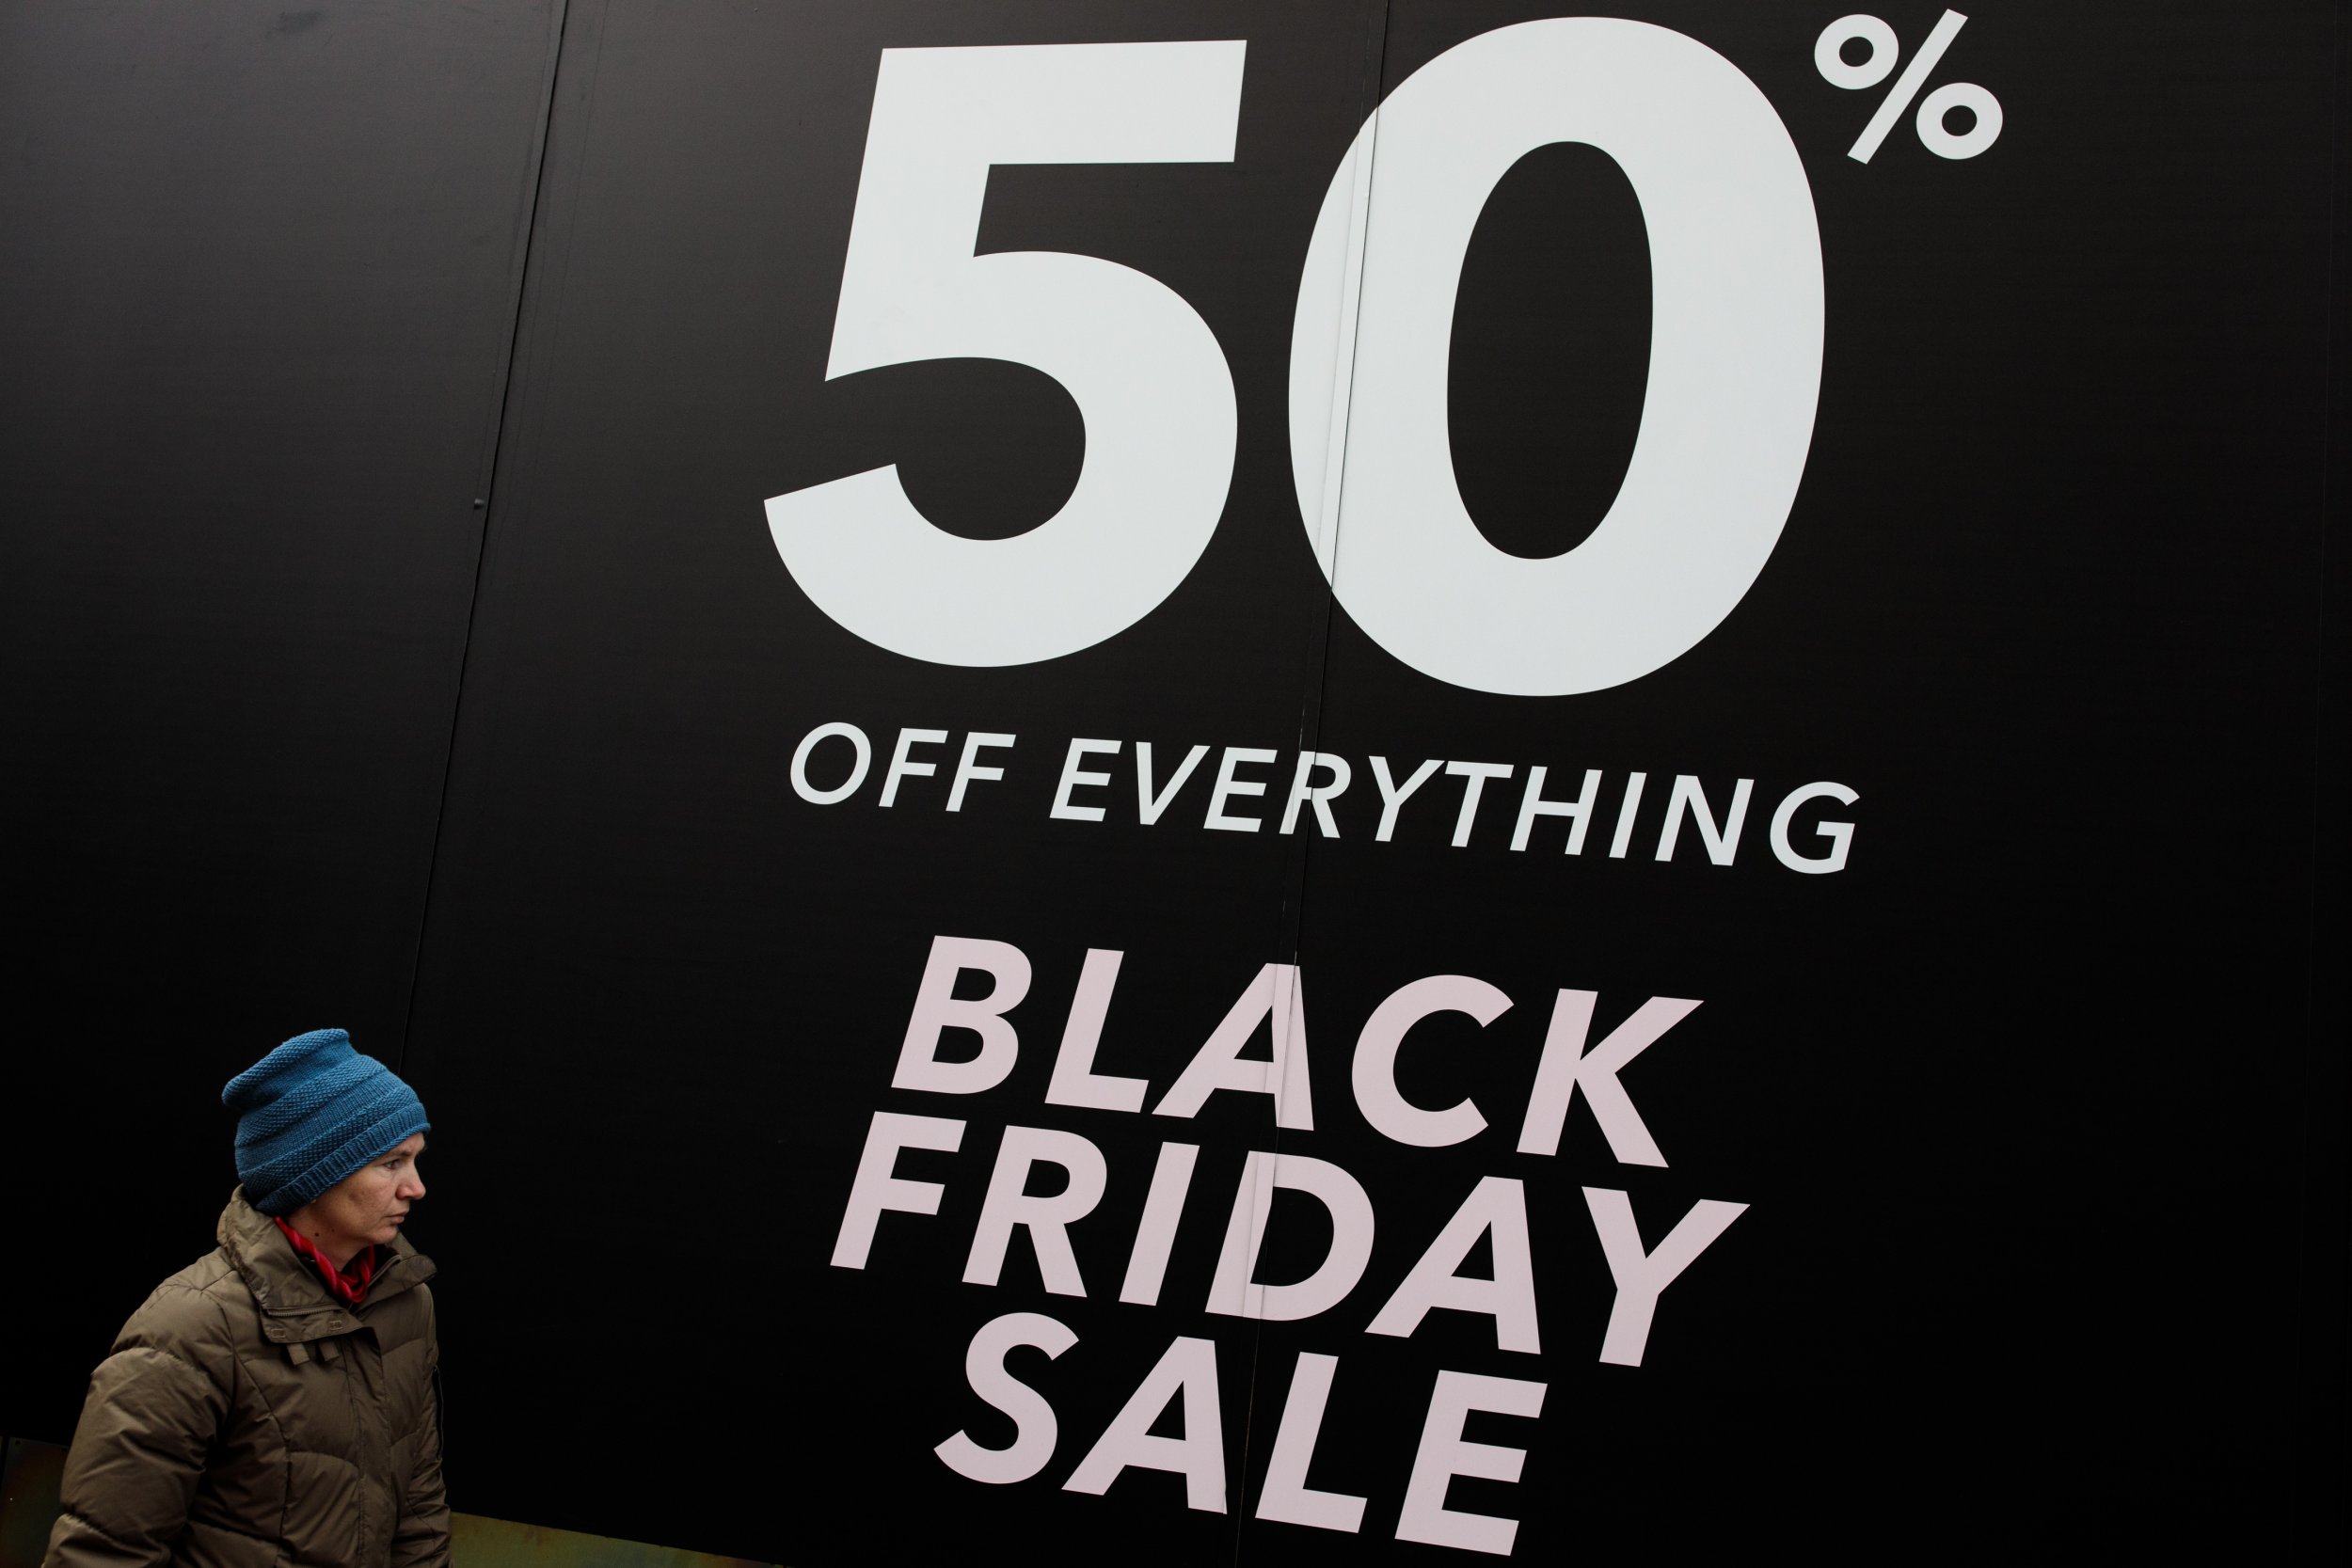 Why Is It Called Black Friday, Cyber Monday? When Are They in 2018? - What Is The Sale Called After Black Friday